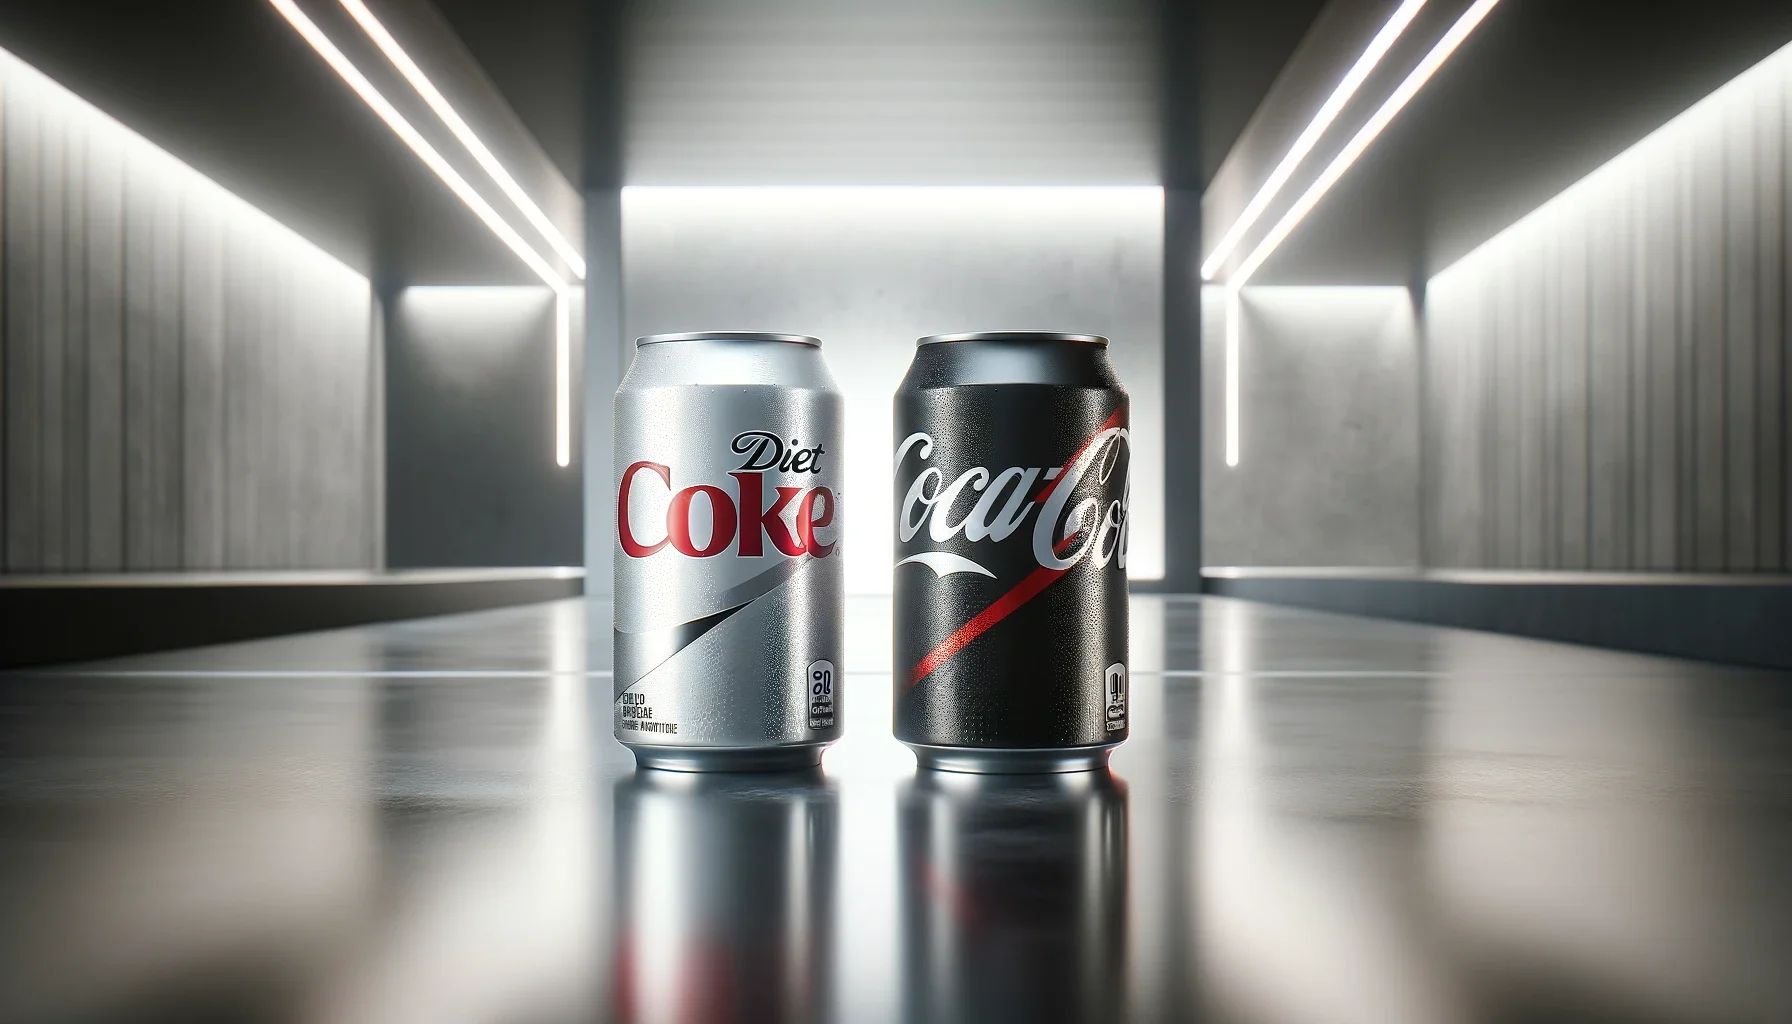 An image showcasing two cans, one of Diet Coke and the other of Coke Zero, placed side by side on a sleek modern surface.